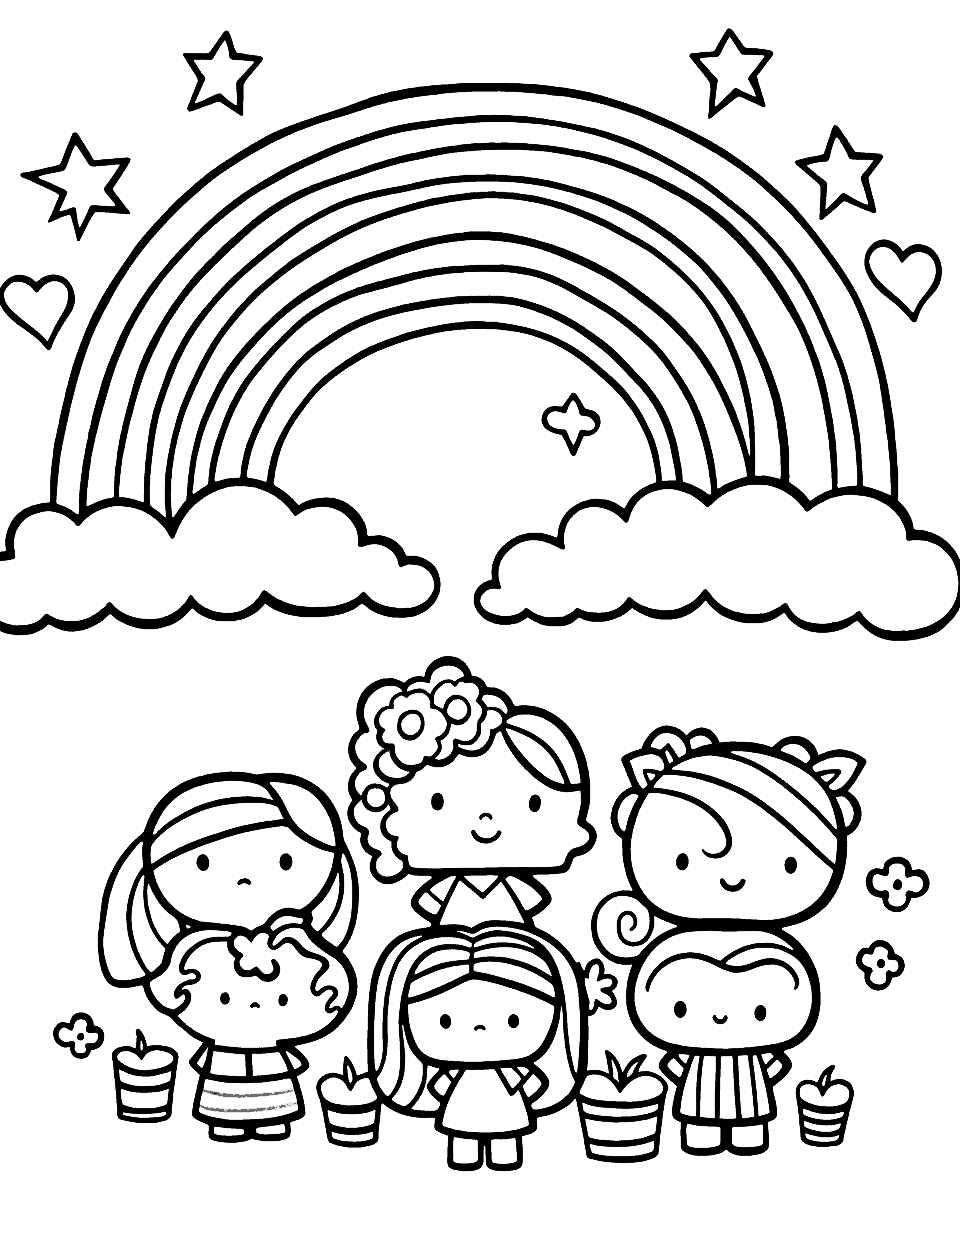 Hello Kitty and Friends Rainbow Party Coloring Page - Hello Kitty and her friends enjoying a party under a rainbow.